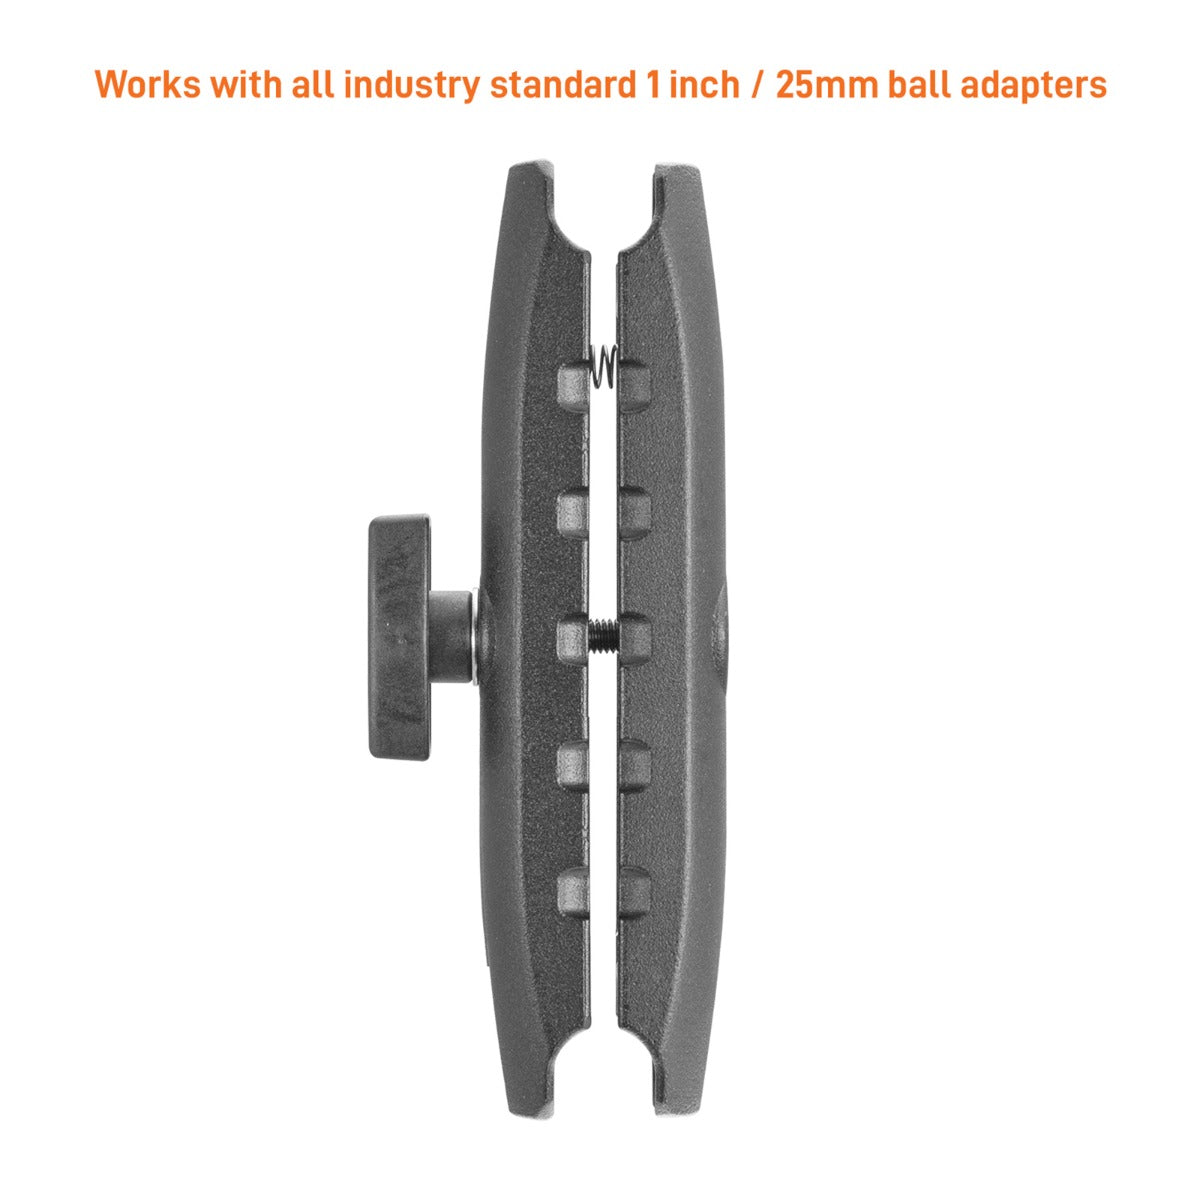 iBOLT™ Aluminum 6 inch Arm for 1-inch / 25mm / B Size Ball adapters